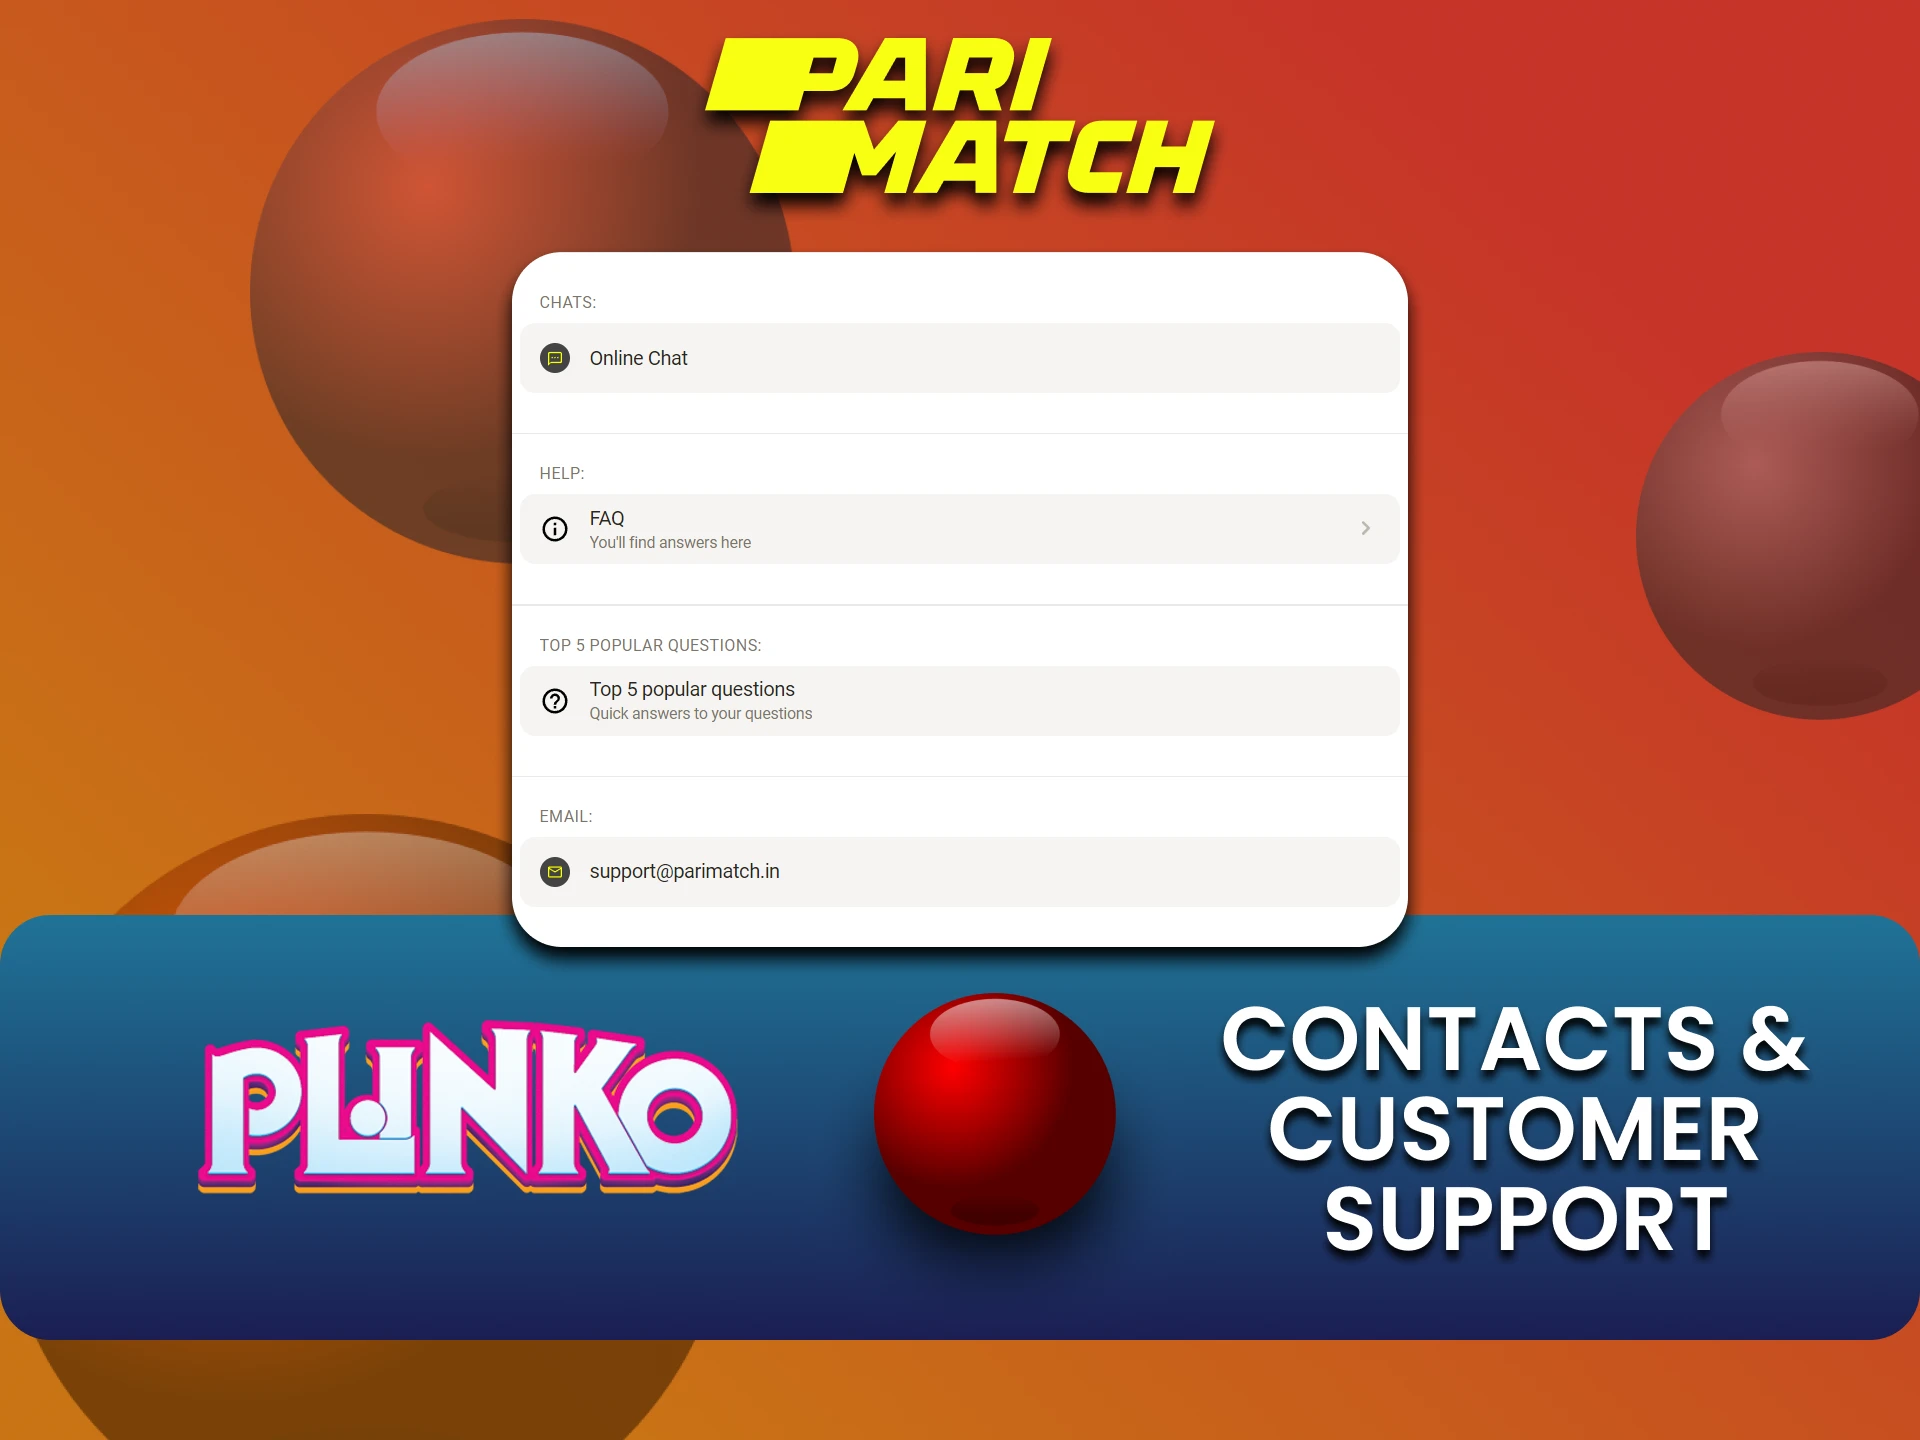 We will tell you how to contact the Parimatch team.